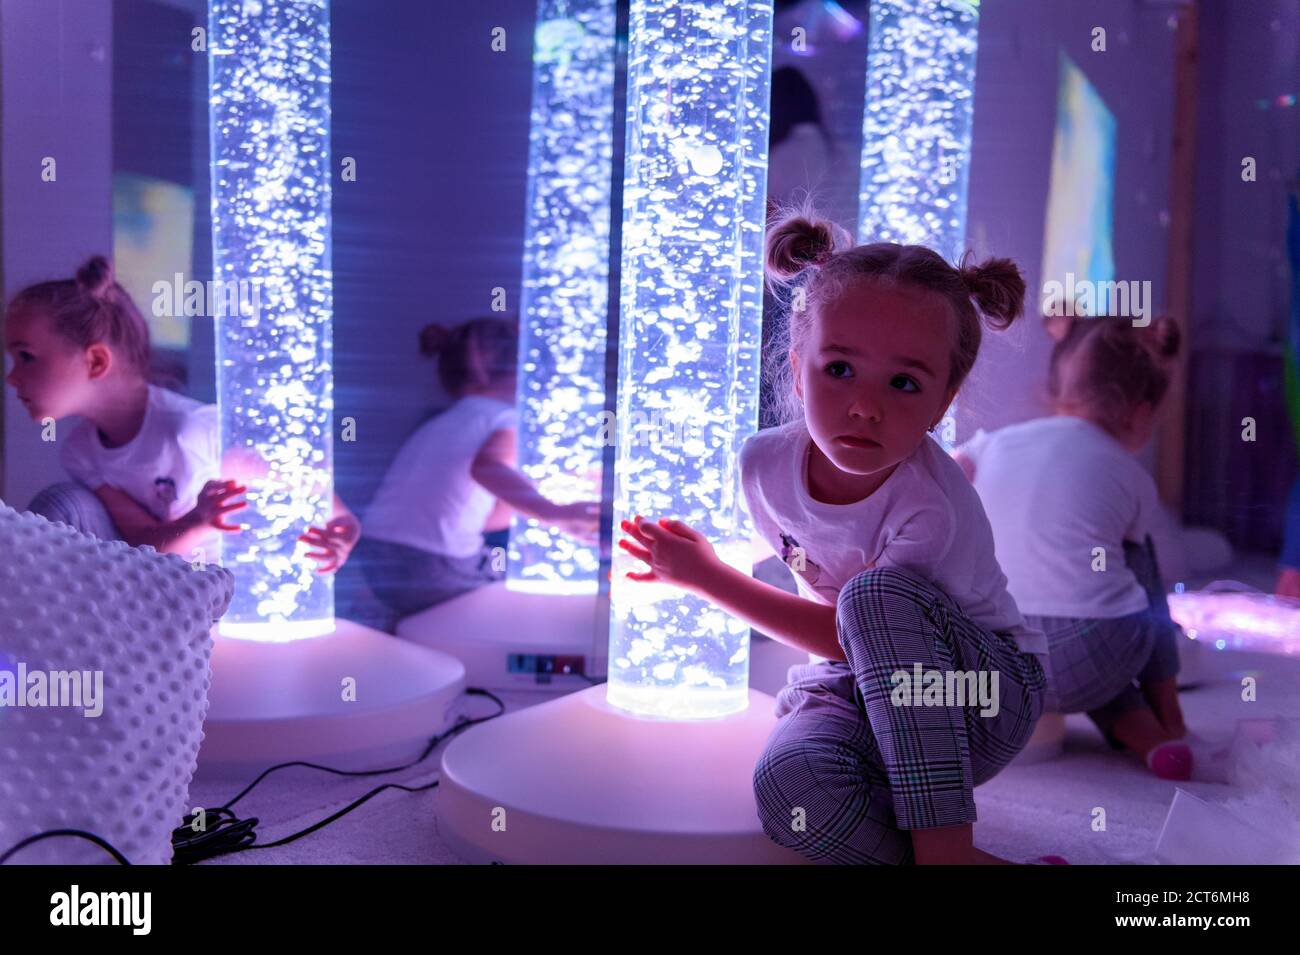 Child in therapy sensory stimulating room, snoezelen. Autistic child interacting with colored lights bubble tube lamp during therapy session. Stock Photo